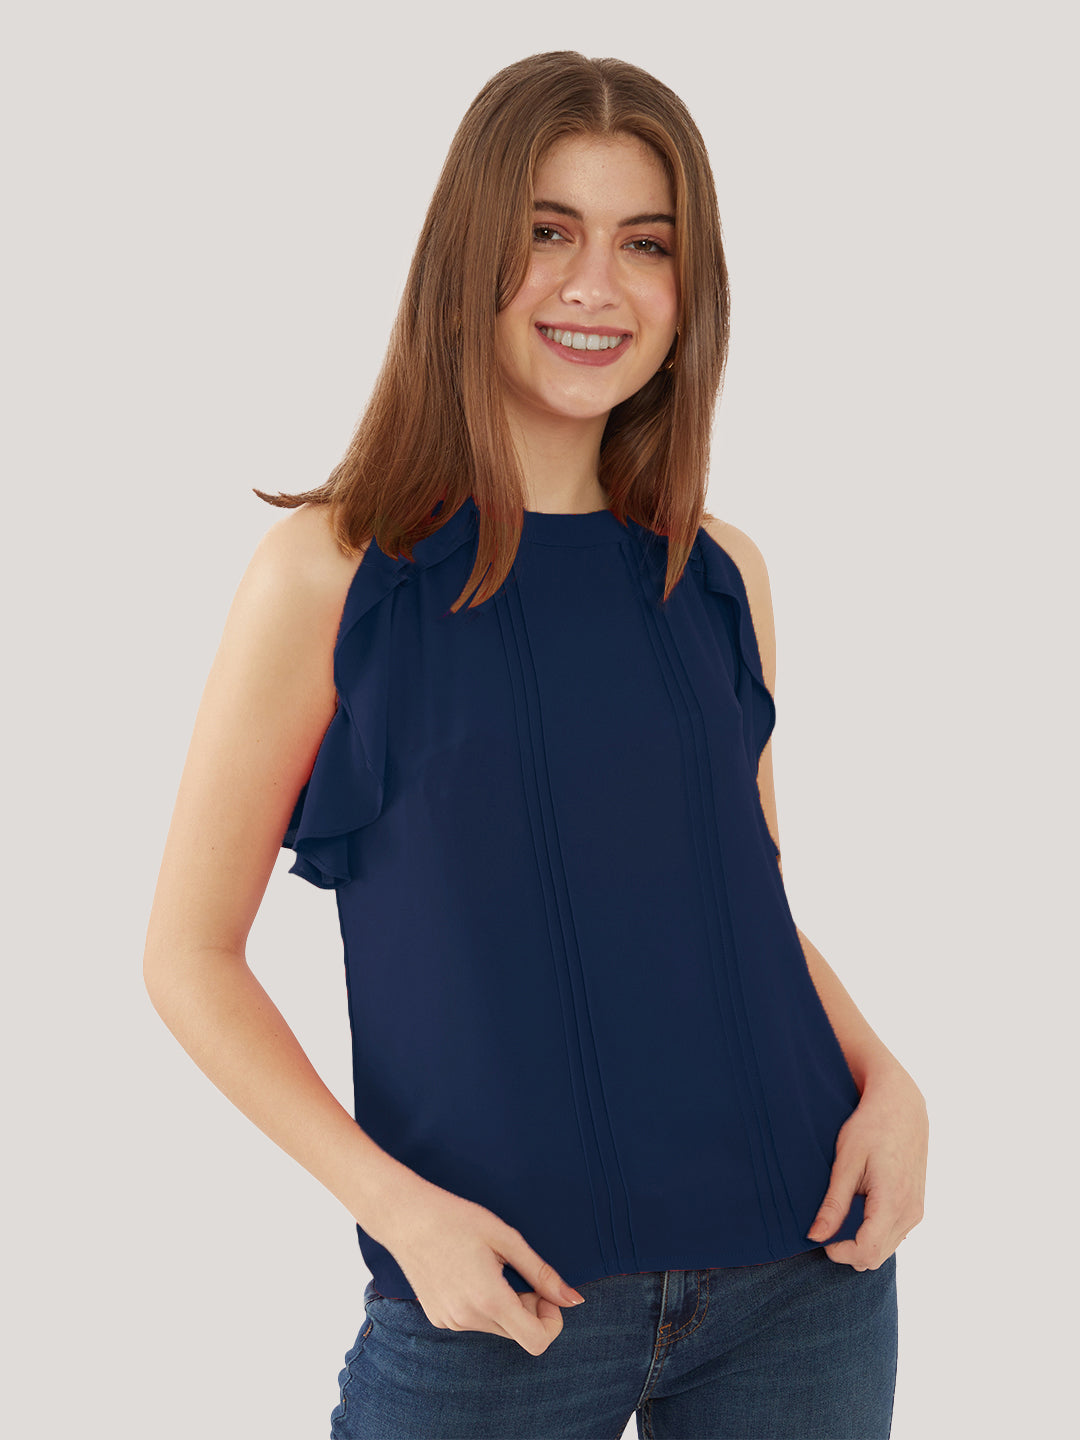 Navy-Blue-Solid-Ruffled-Top-for-Women-VT02364_106-Navy-2